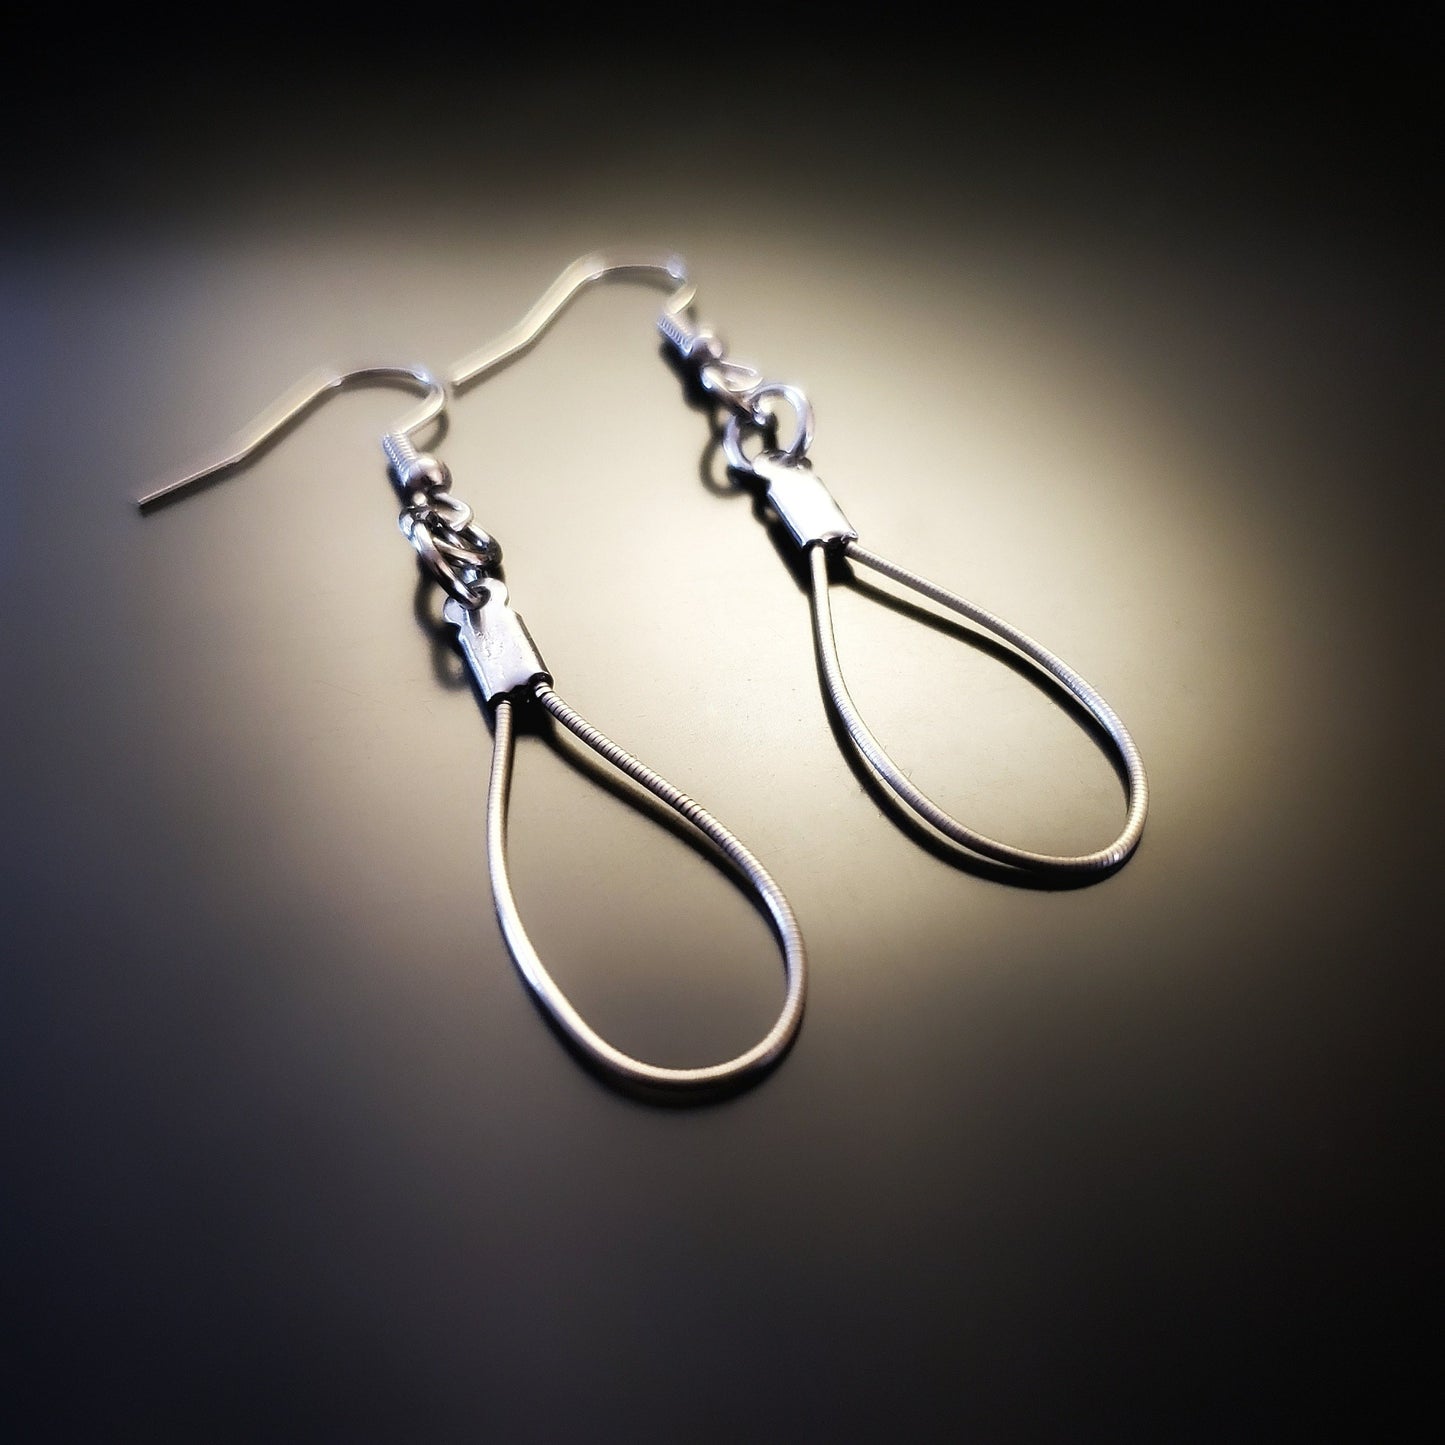 a pair of teardrop style earrings made from upcycled violin strings